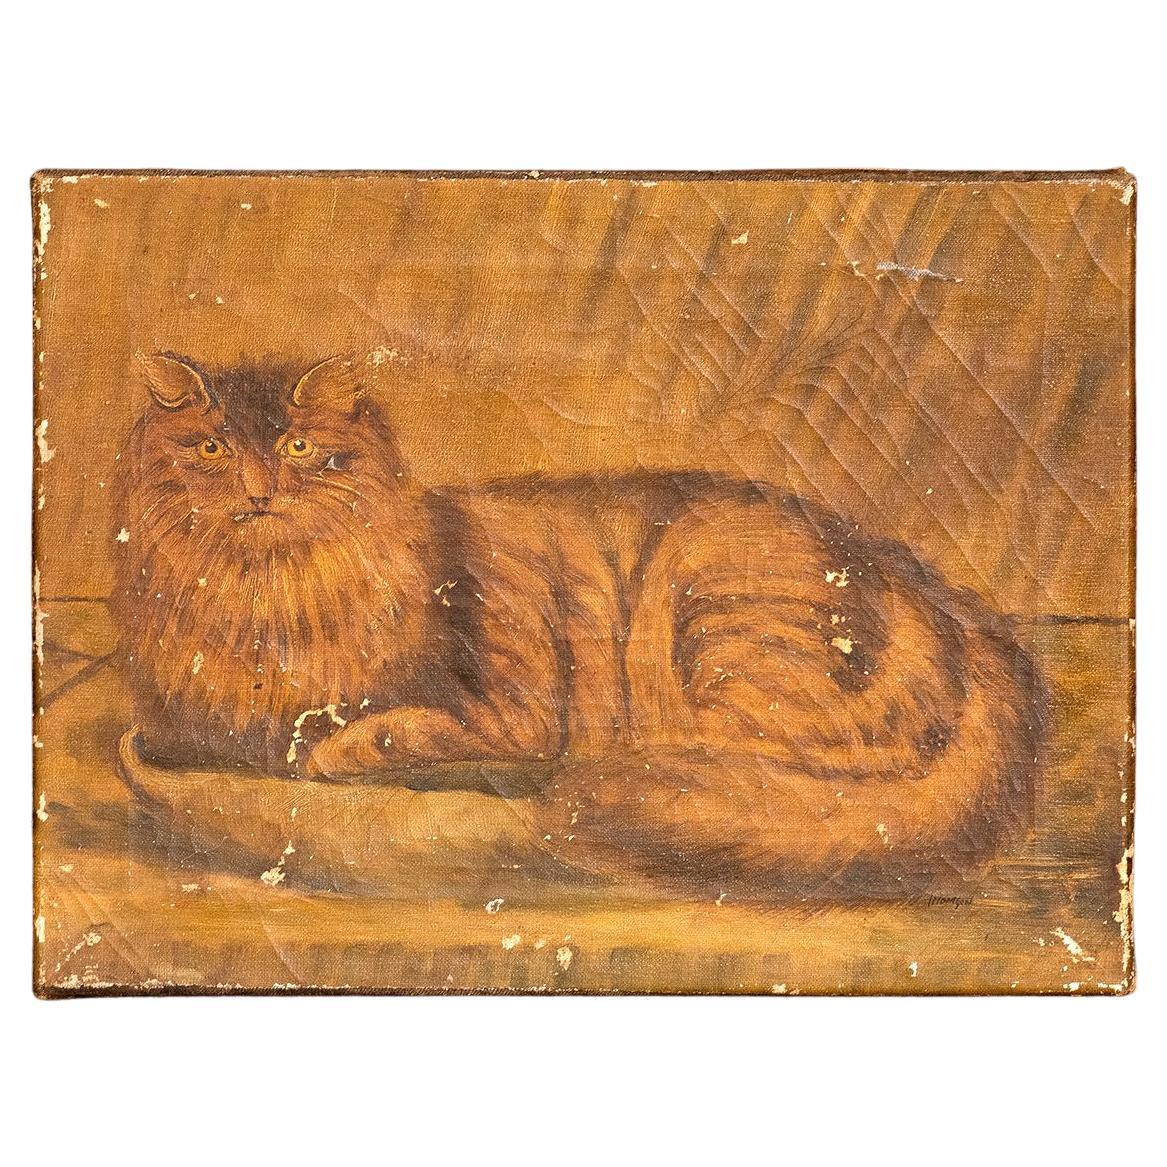 Naive Folk Art Study of a Cat, Oil on Canvas, 19th Century Antique Painting